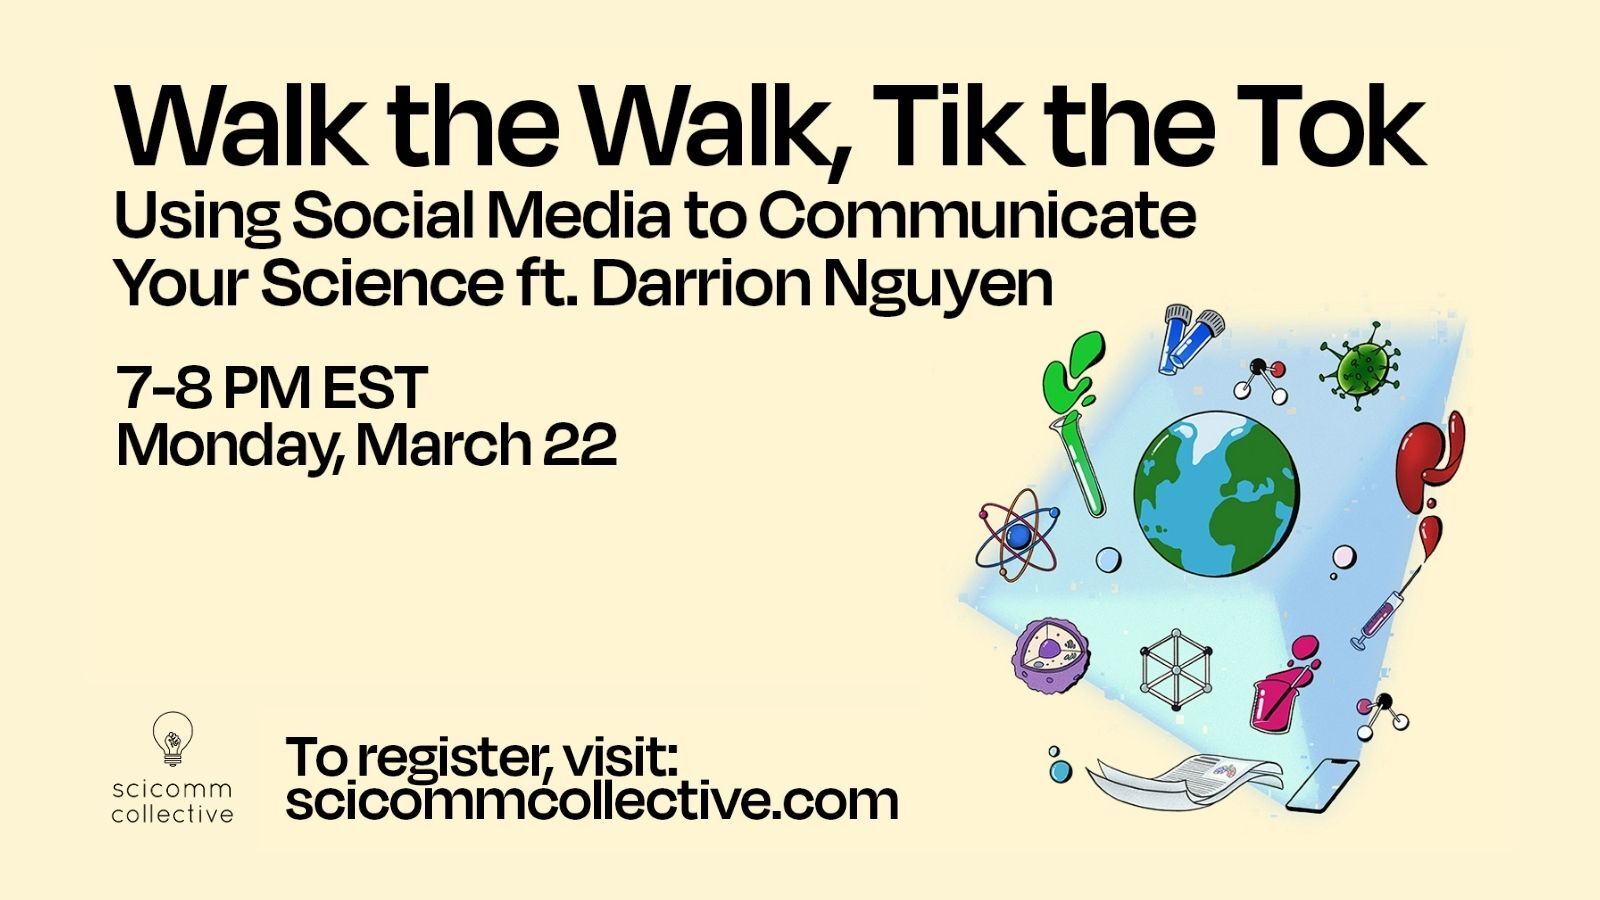 Walk the Walk, Tik the Tok: Using Social Media to Communicate Your Science ft. Darrion Nguyen